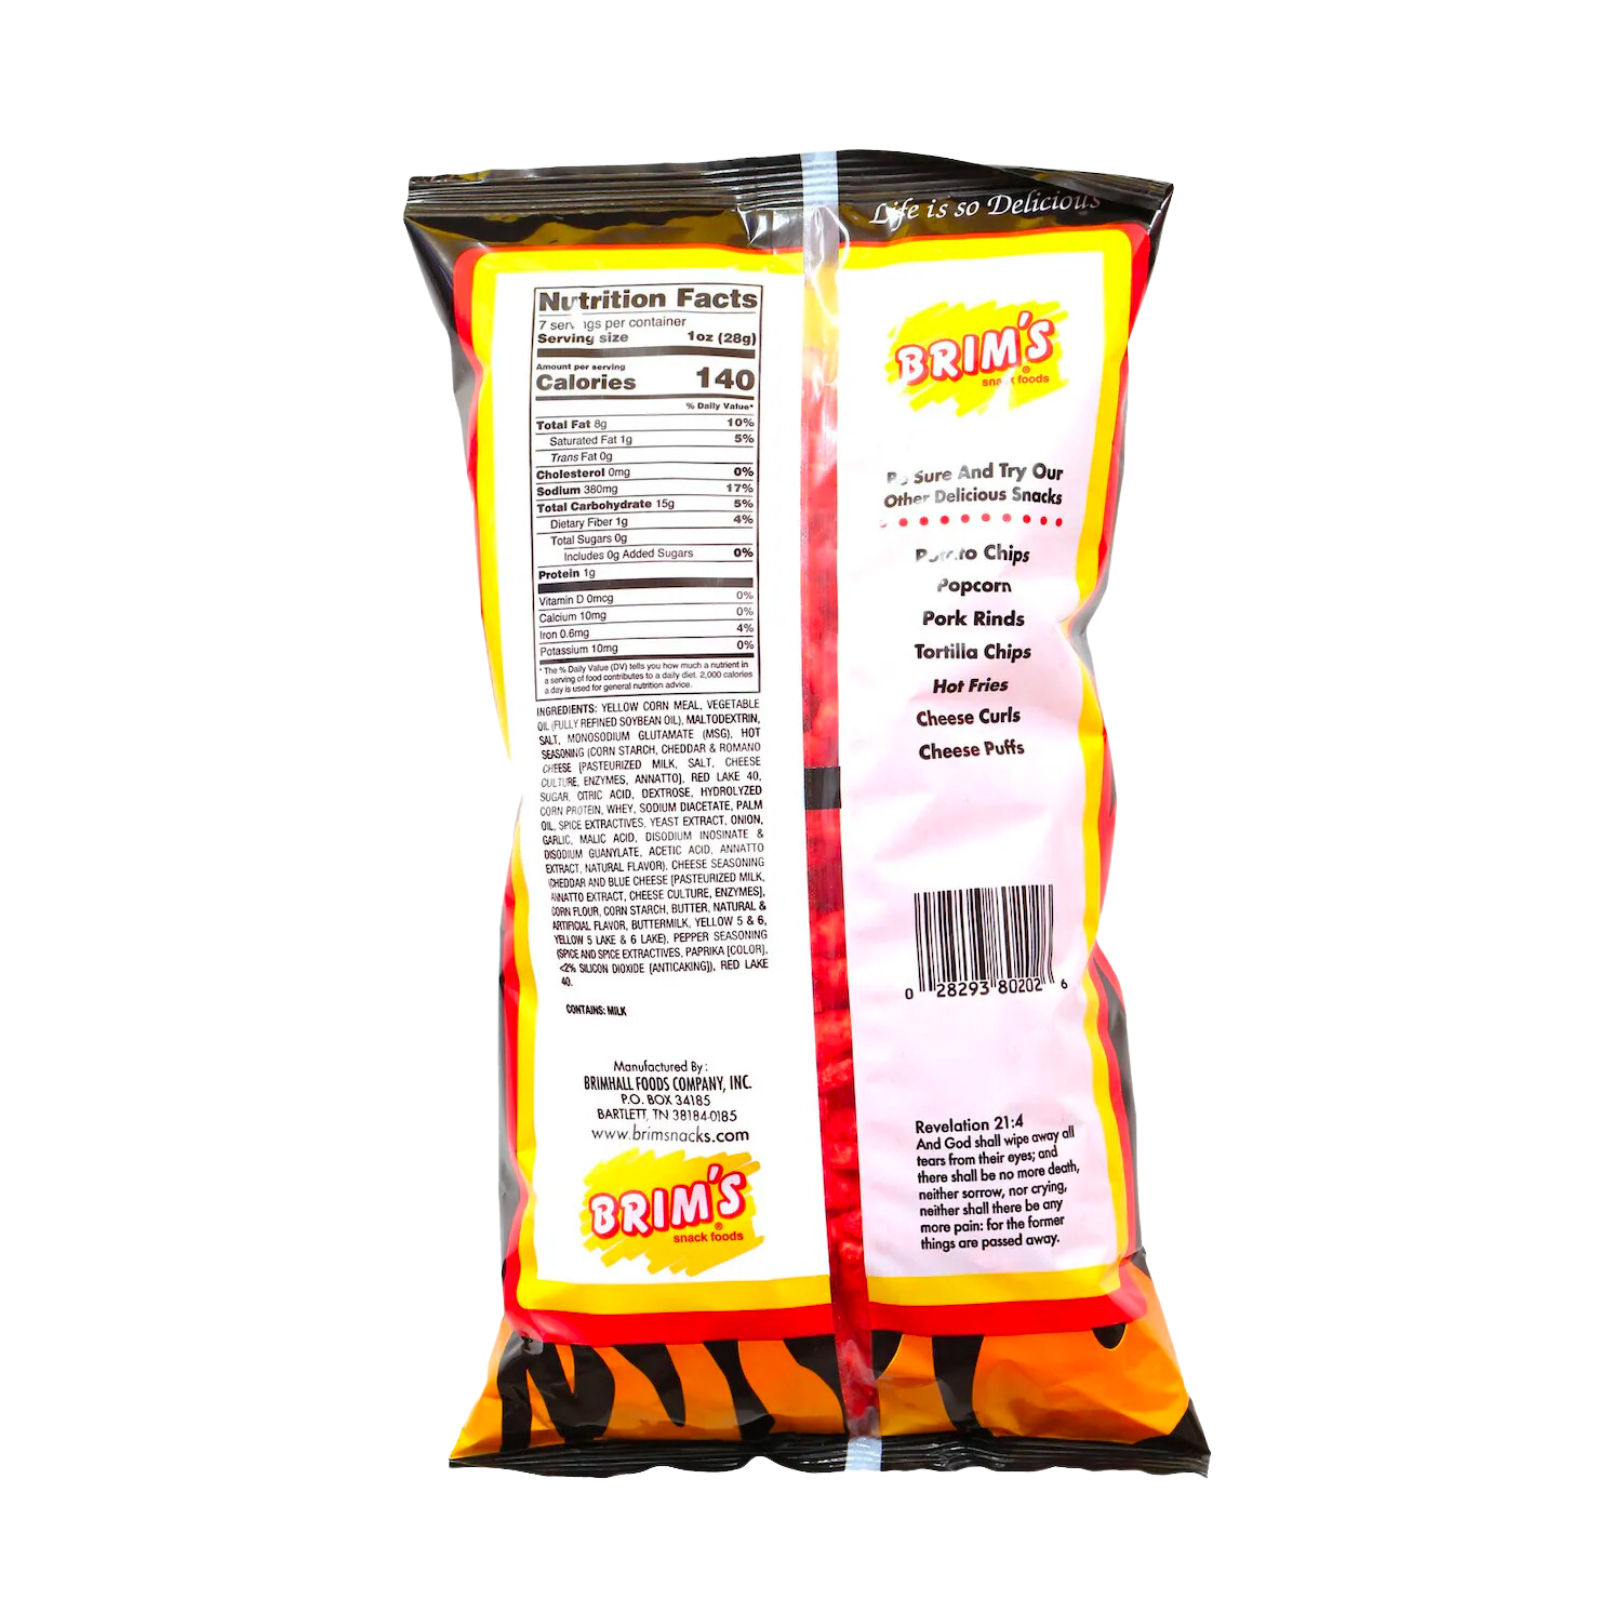 Brim's Crunchy Hot Cheese Curls (7 oz., 6-pack) - image 4 of 6